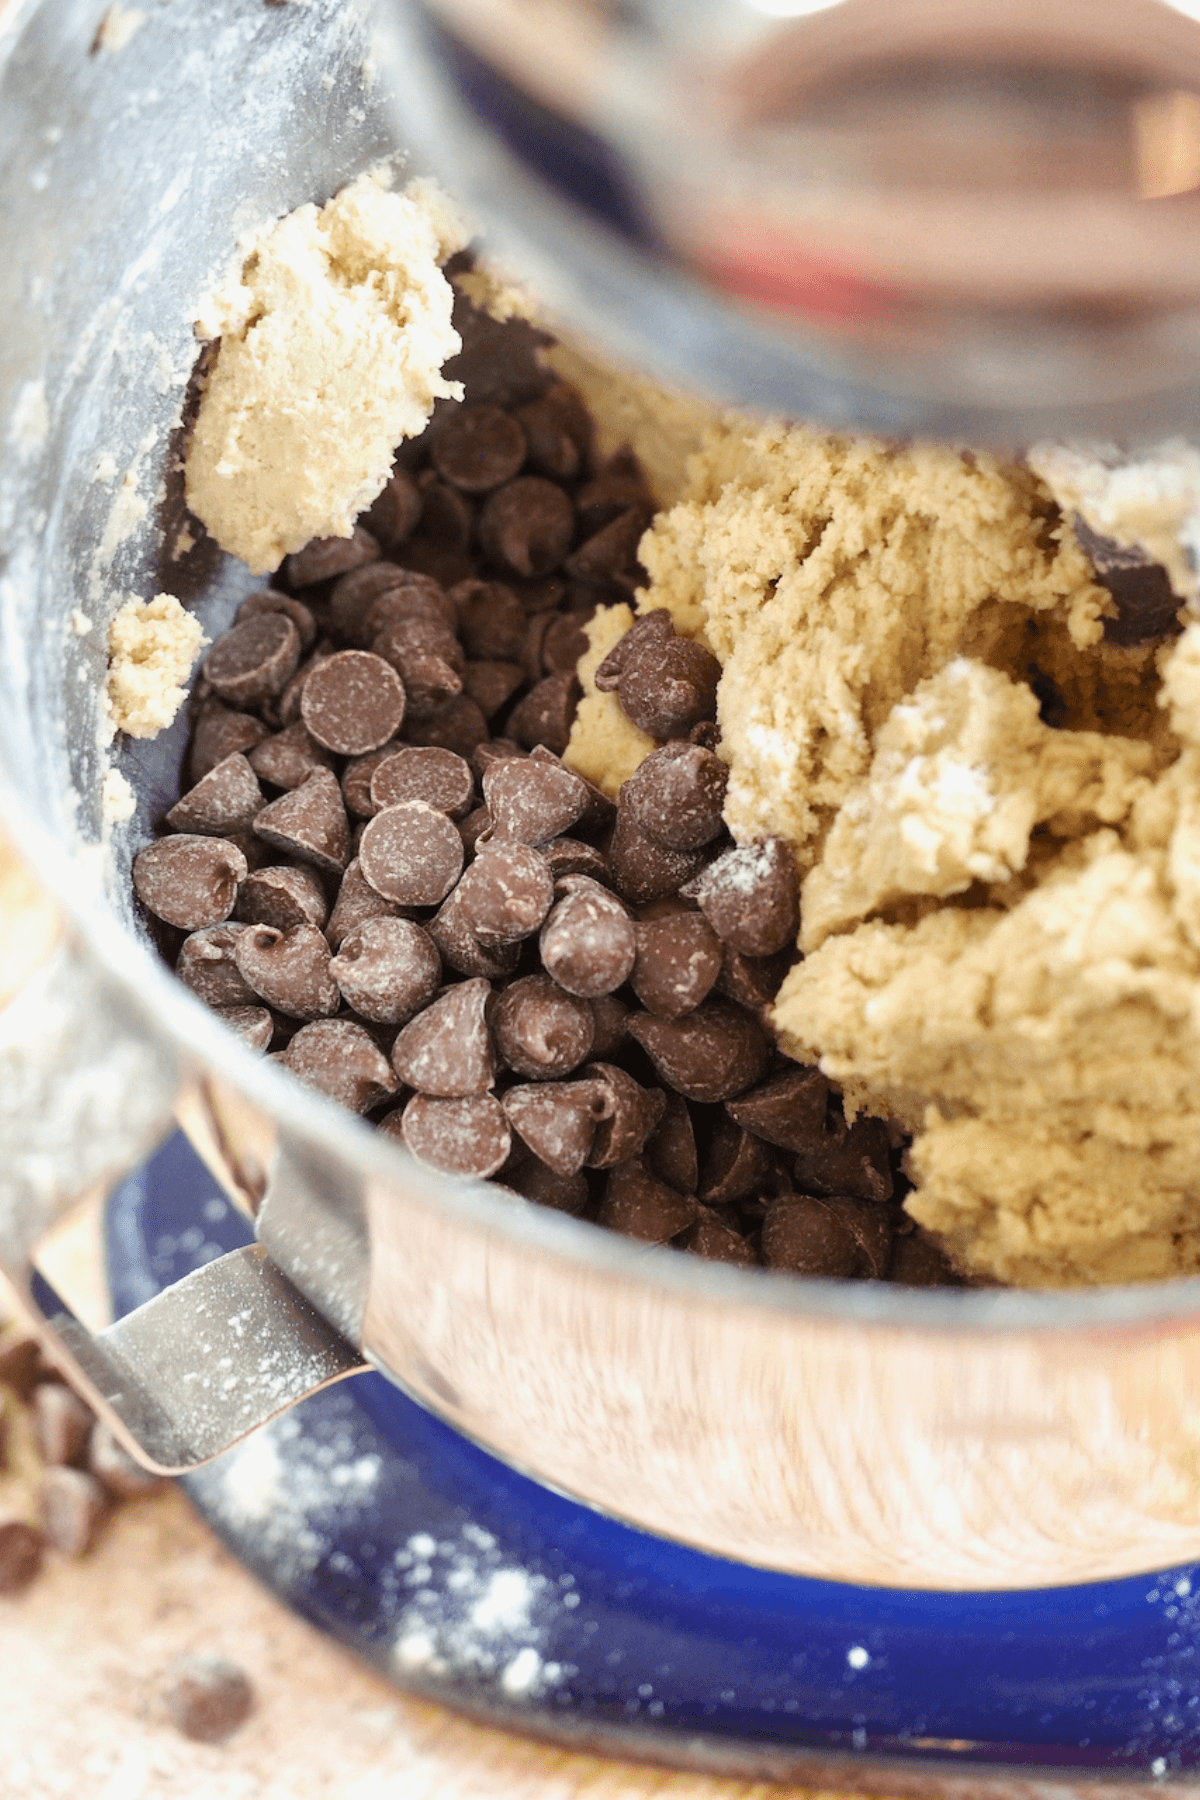 Chocolate chip cookie batter with milk chocolate chips mixing in.